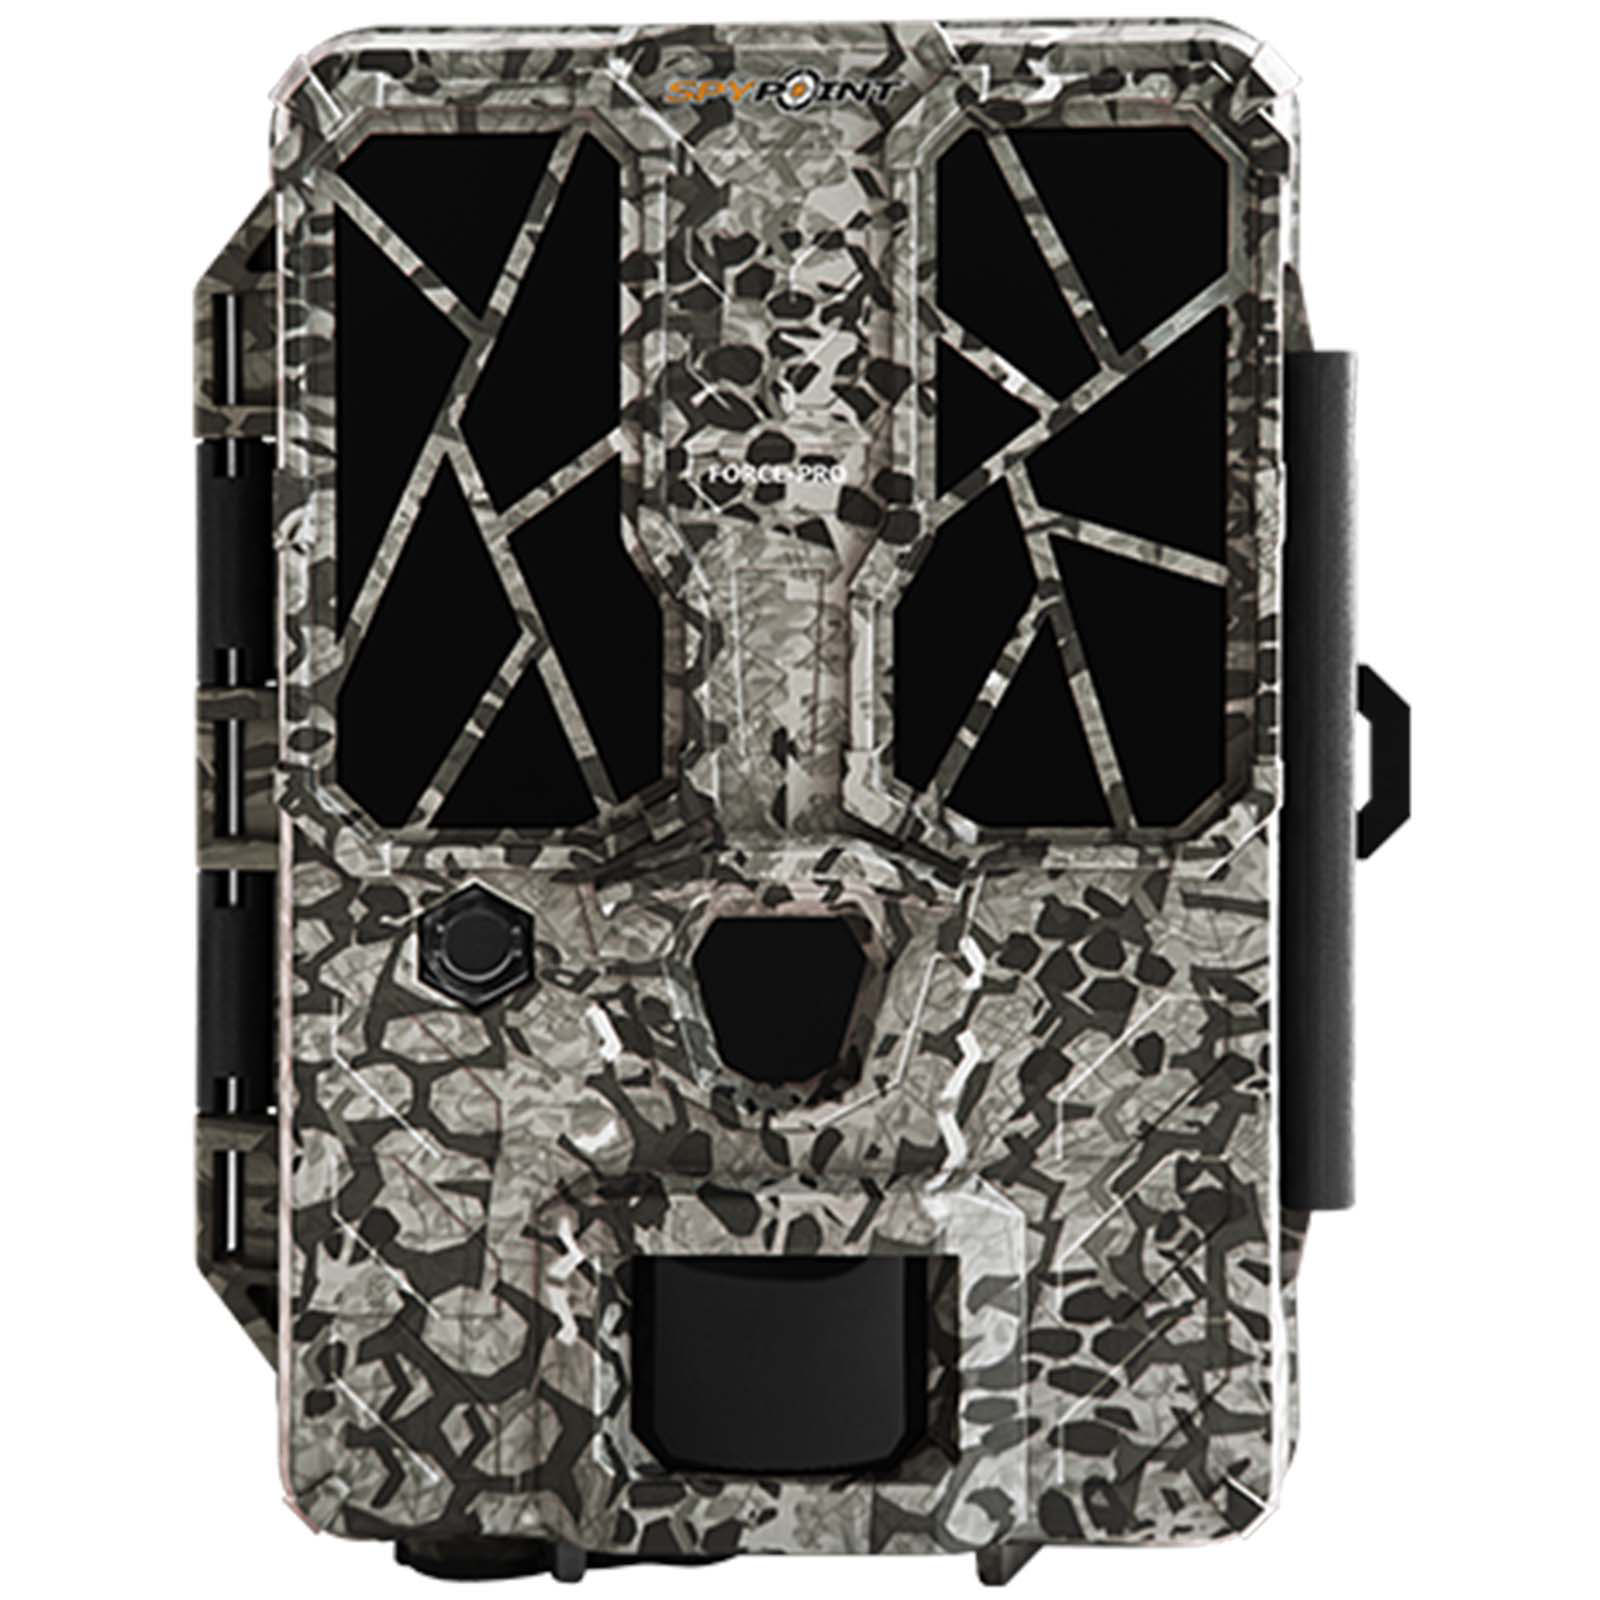 Image of SpyPoint FORCEPRO Trail Camera